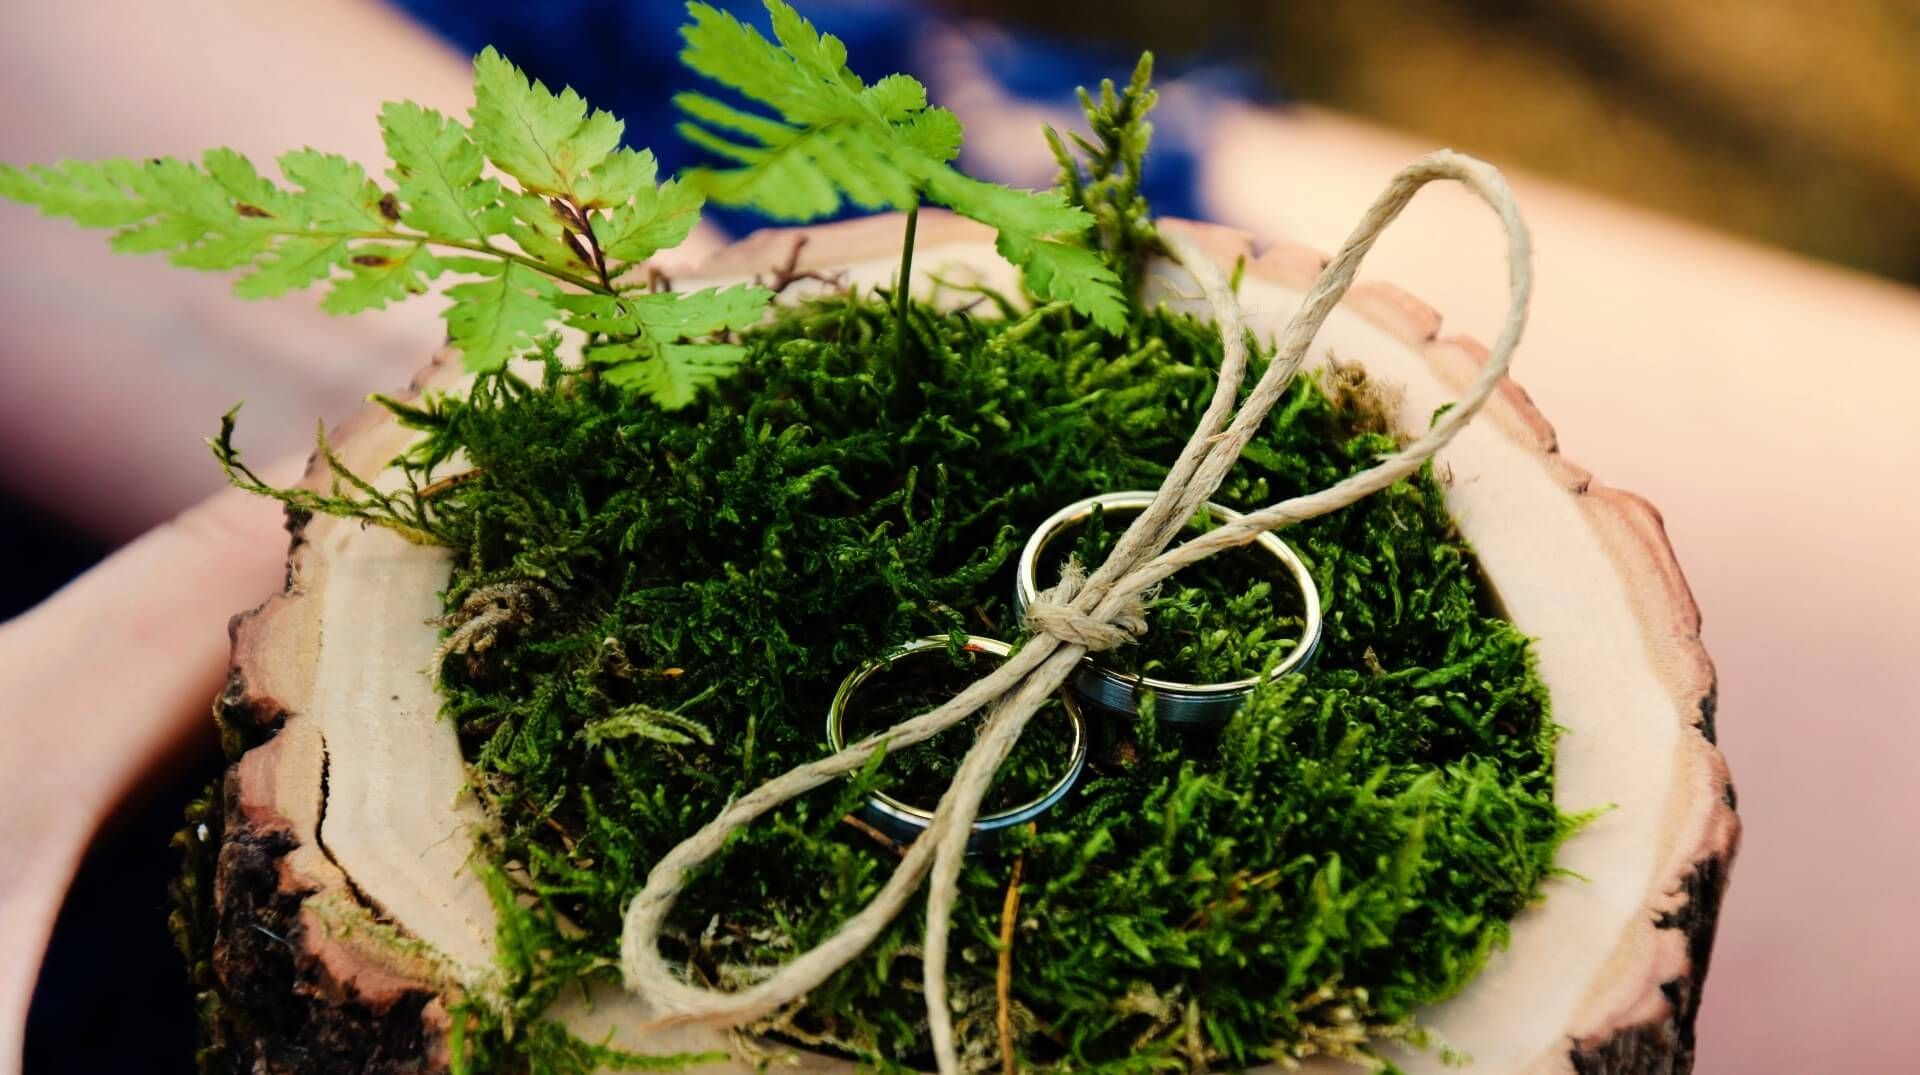 Simple but elegant wedding rings in a pot of greenery as a symbol of an eco-friendly wedding